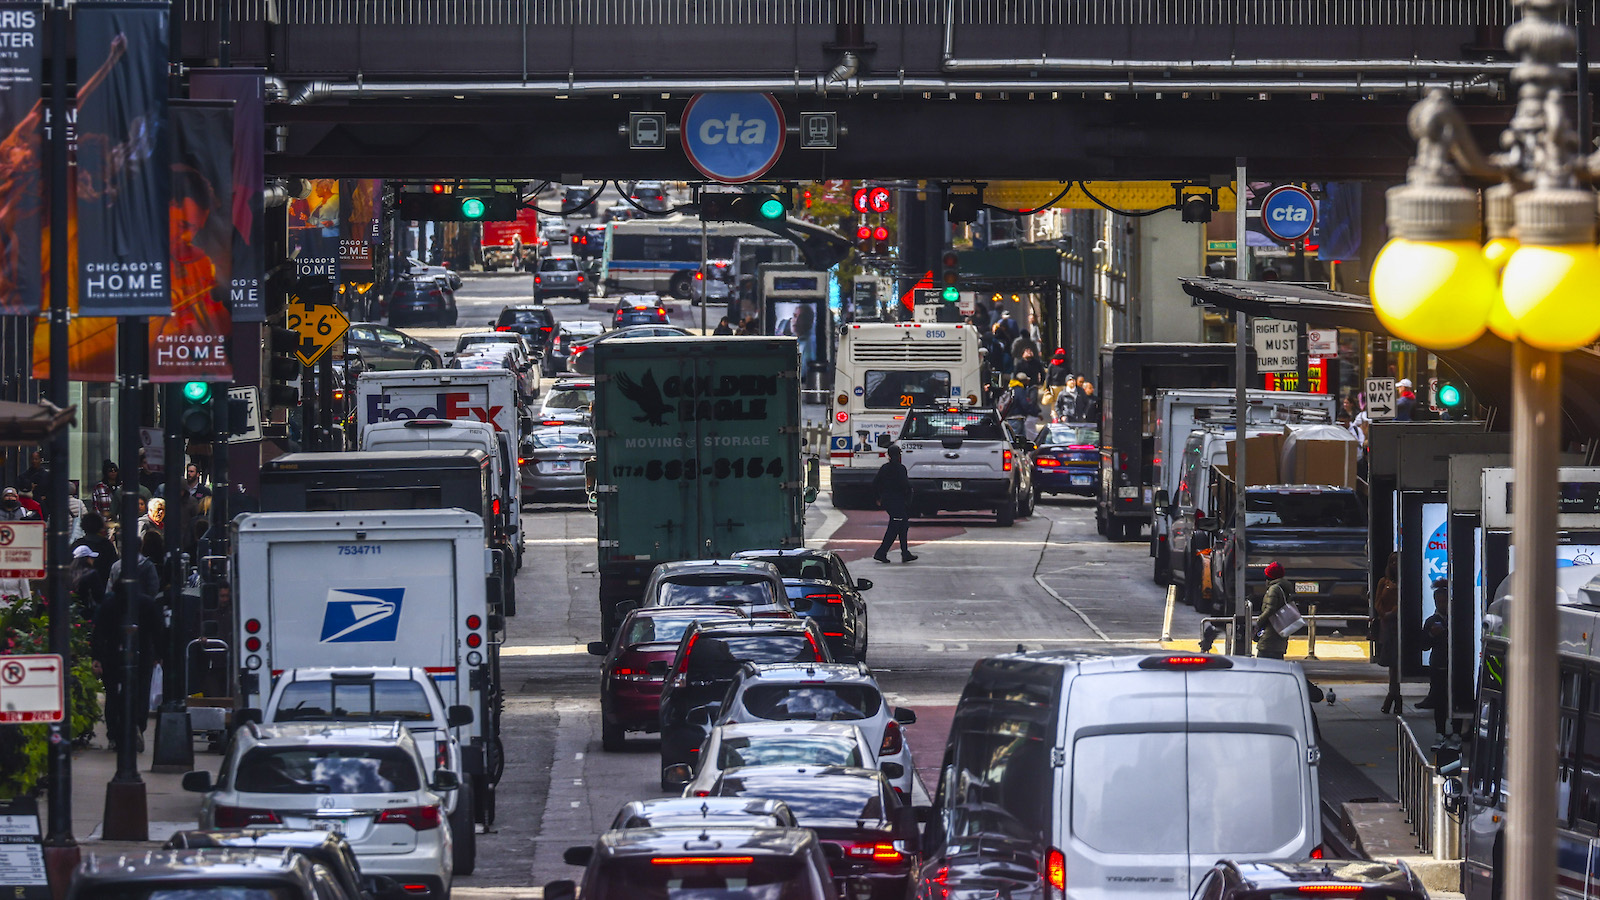 In Chicago, tired of truck pollution and counting traffic – Grist